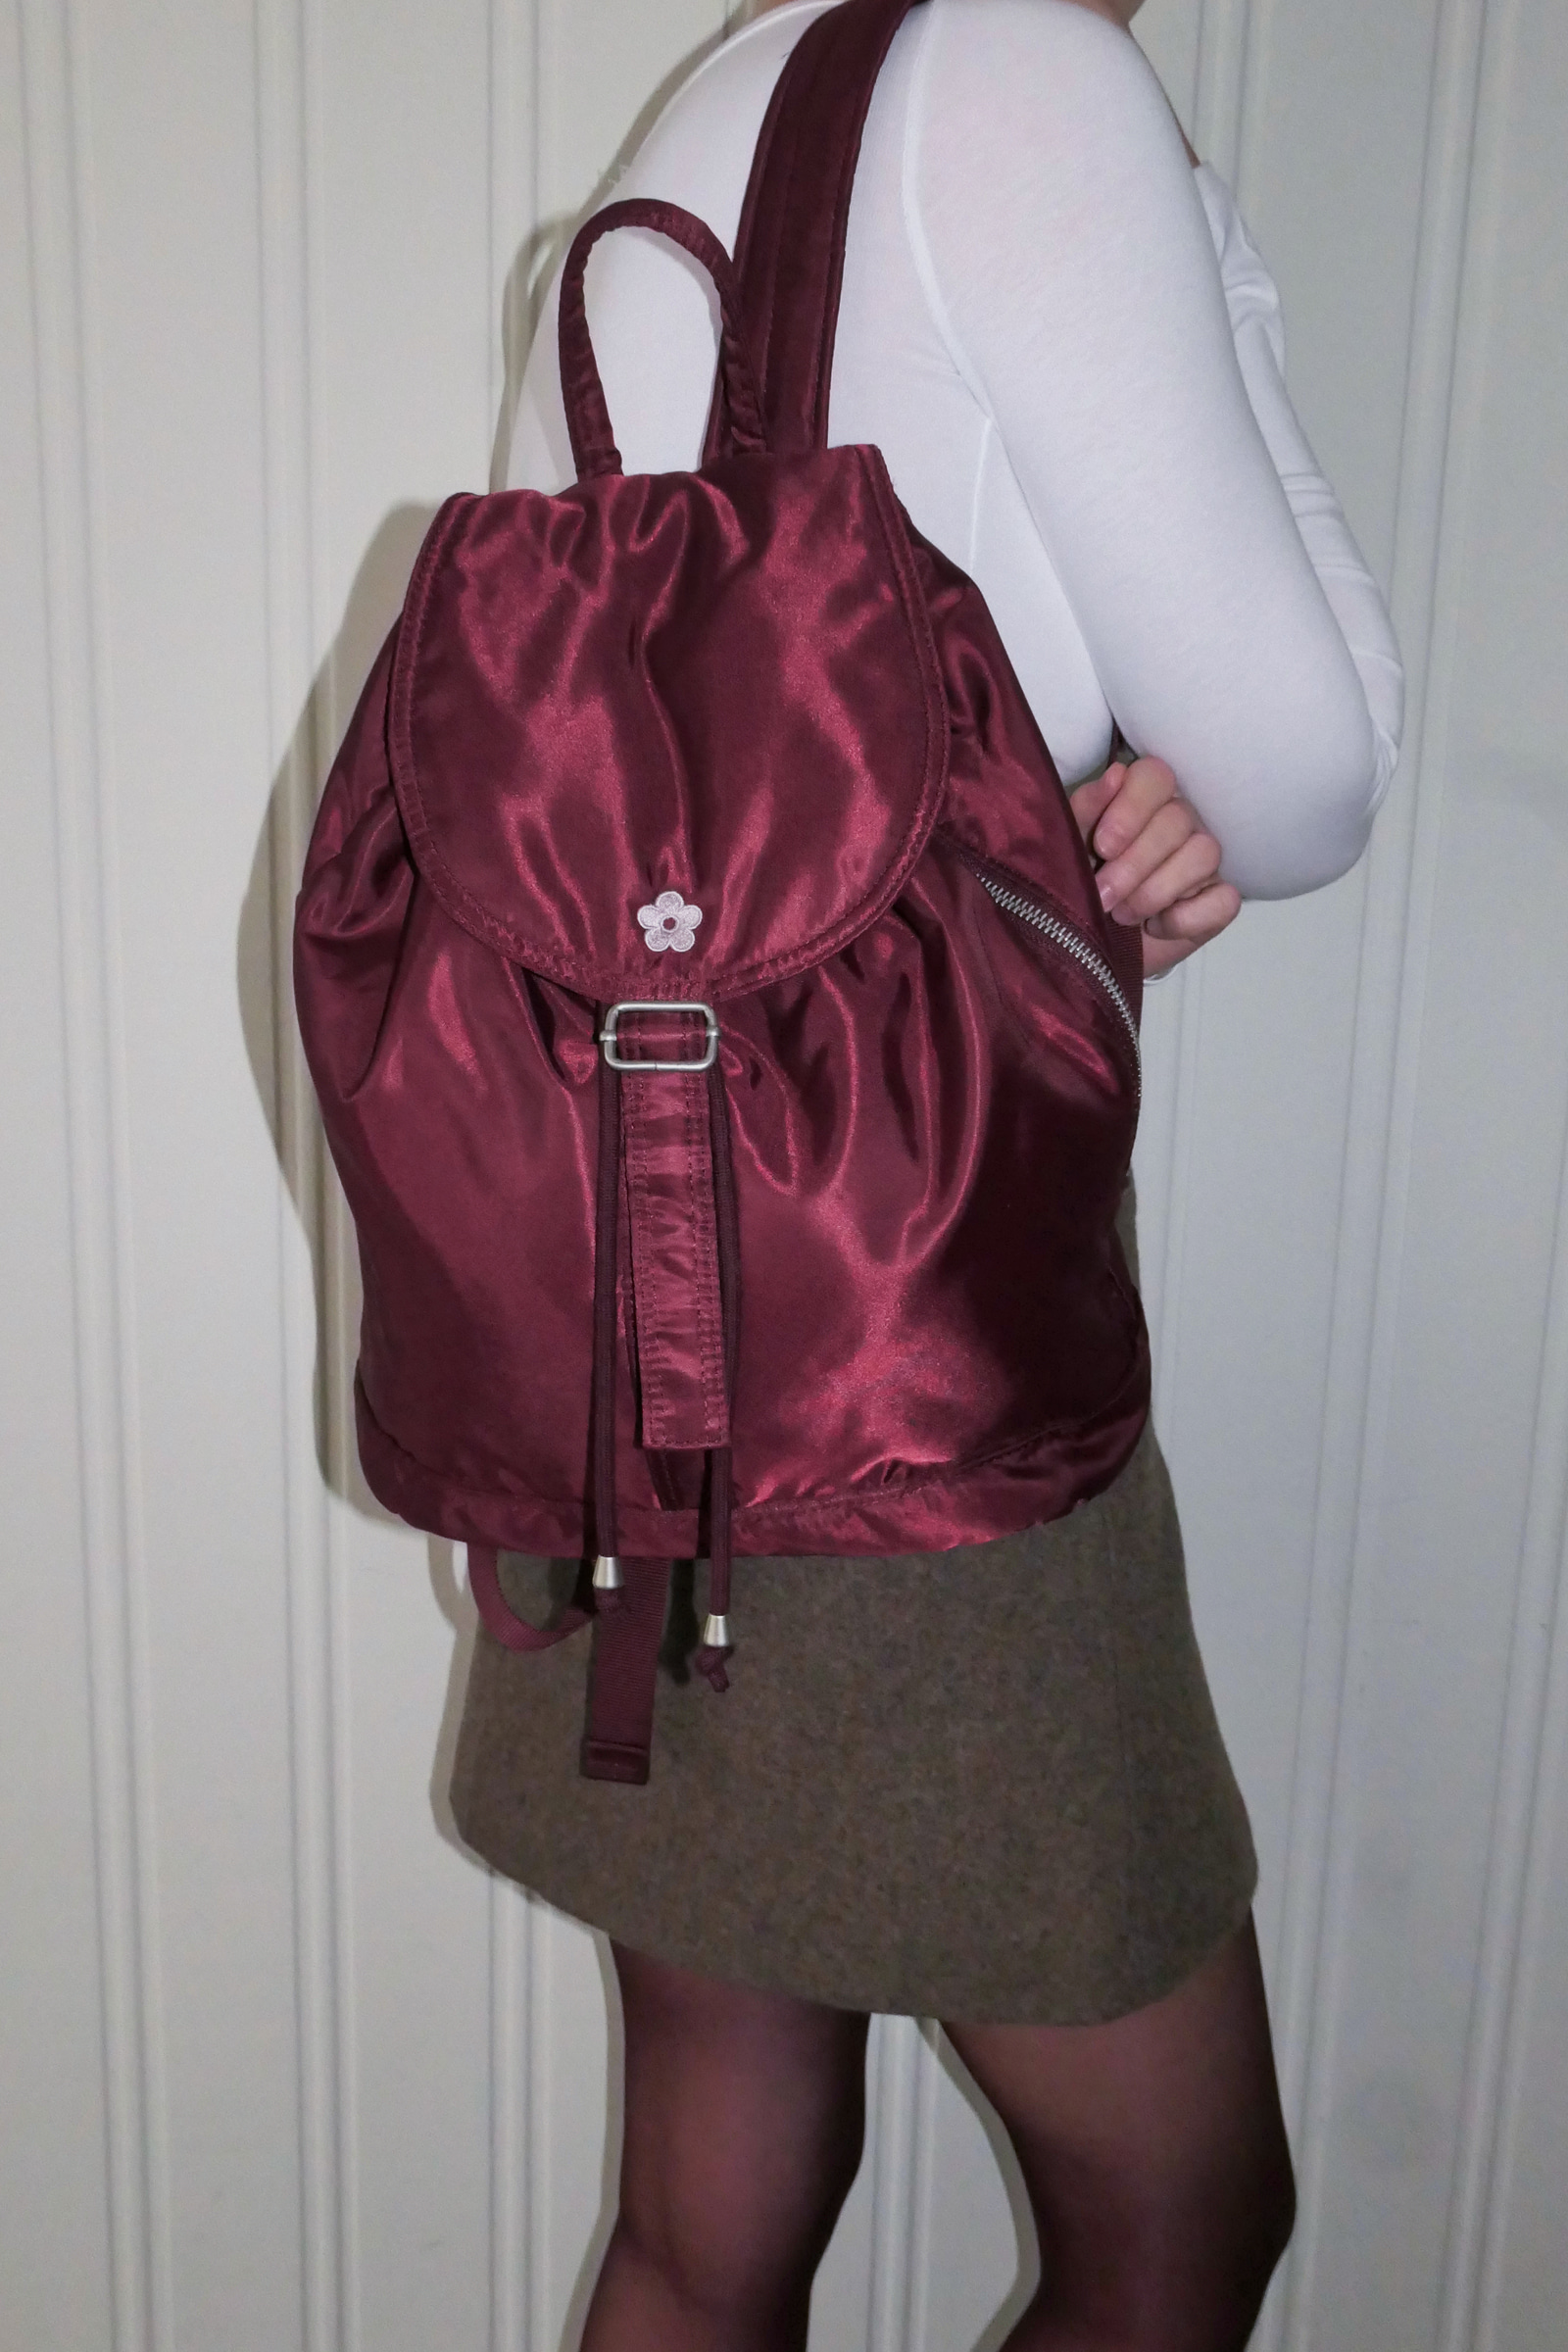 DAISY DRESSY BACKPACK - AMARANTH RED